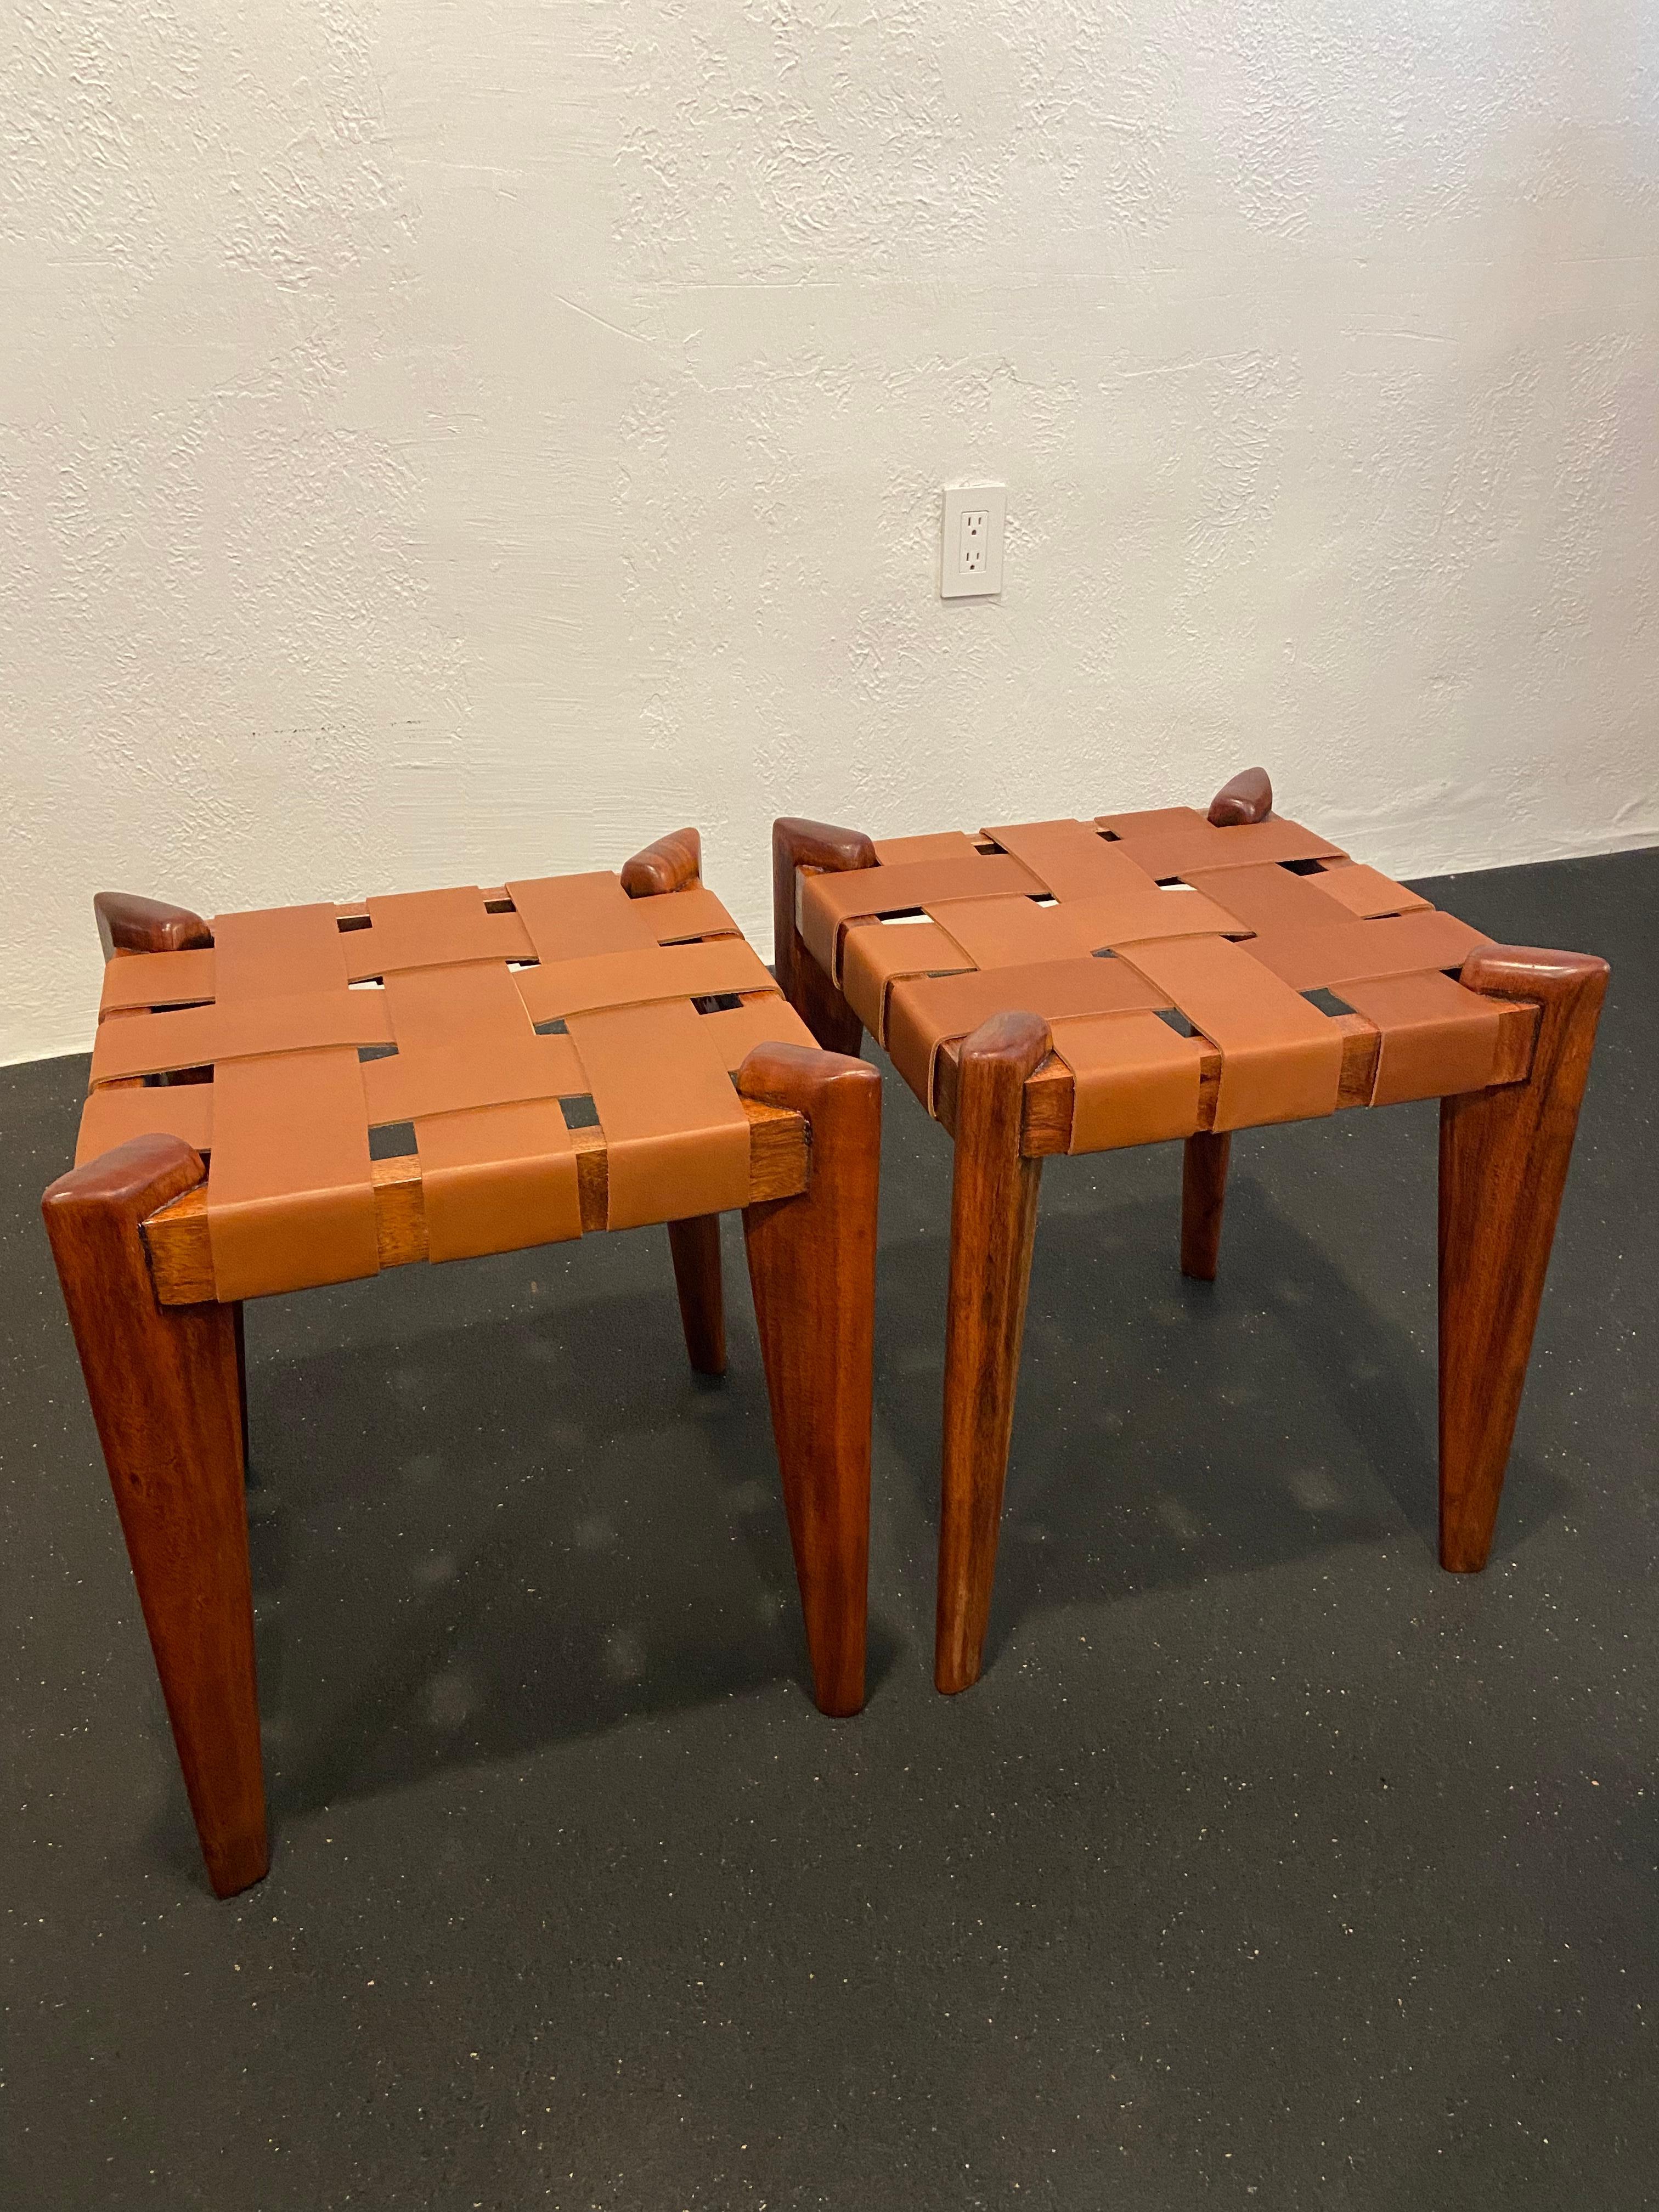 Edmond Spence woven leather stools. Constructed of mesquite wood which has different shading throughout typical of the wood. The stools have been refinished with new leather straps applied. 

Would work well in a variety of interiors such as